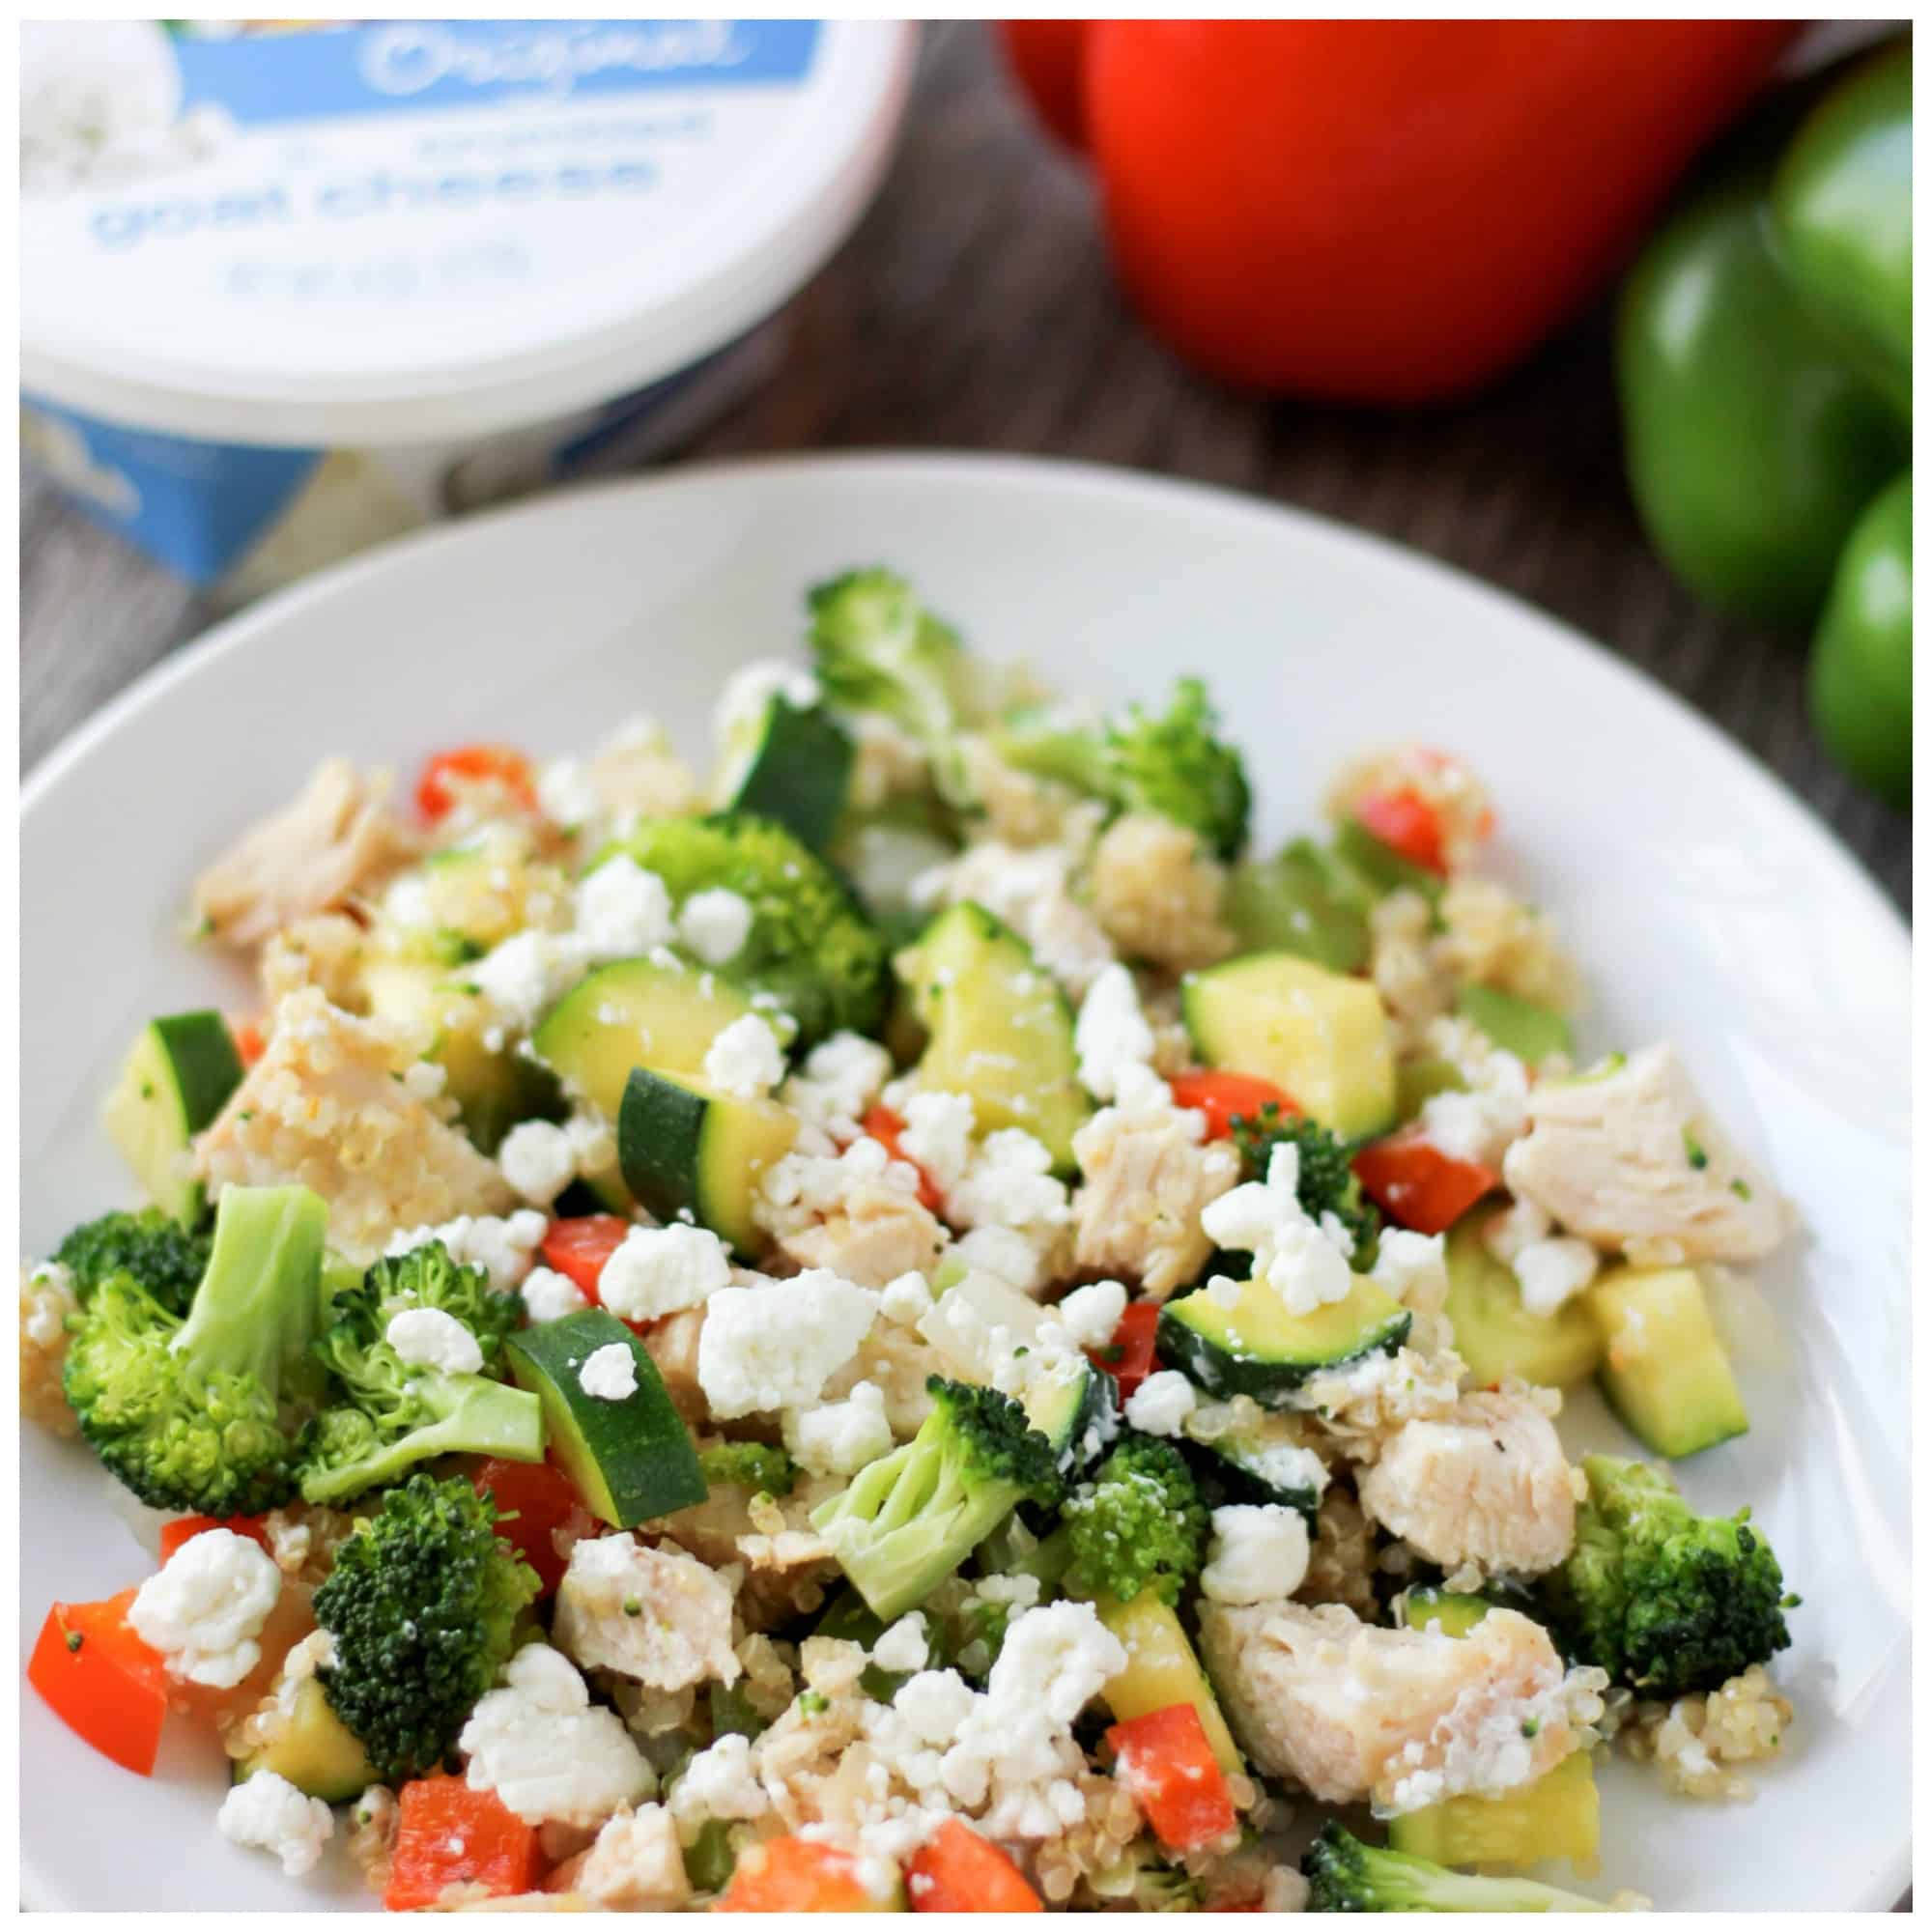 Quinoa Bowl with Grilled Chicken, Veggies, and Goat Cheese